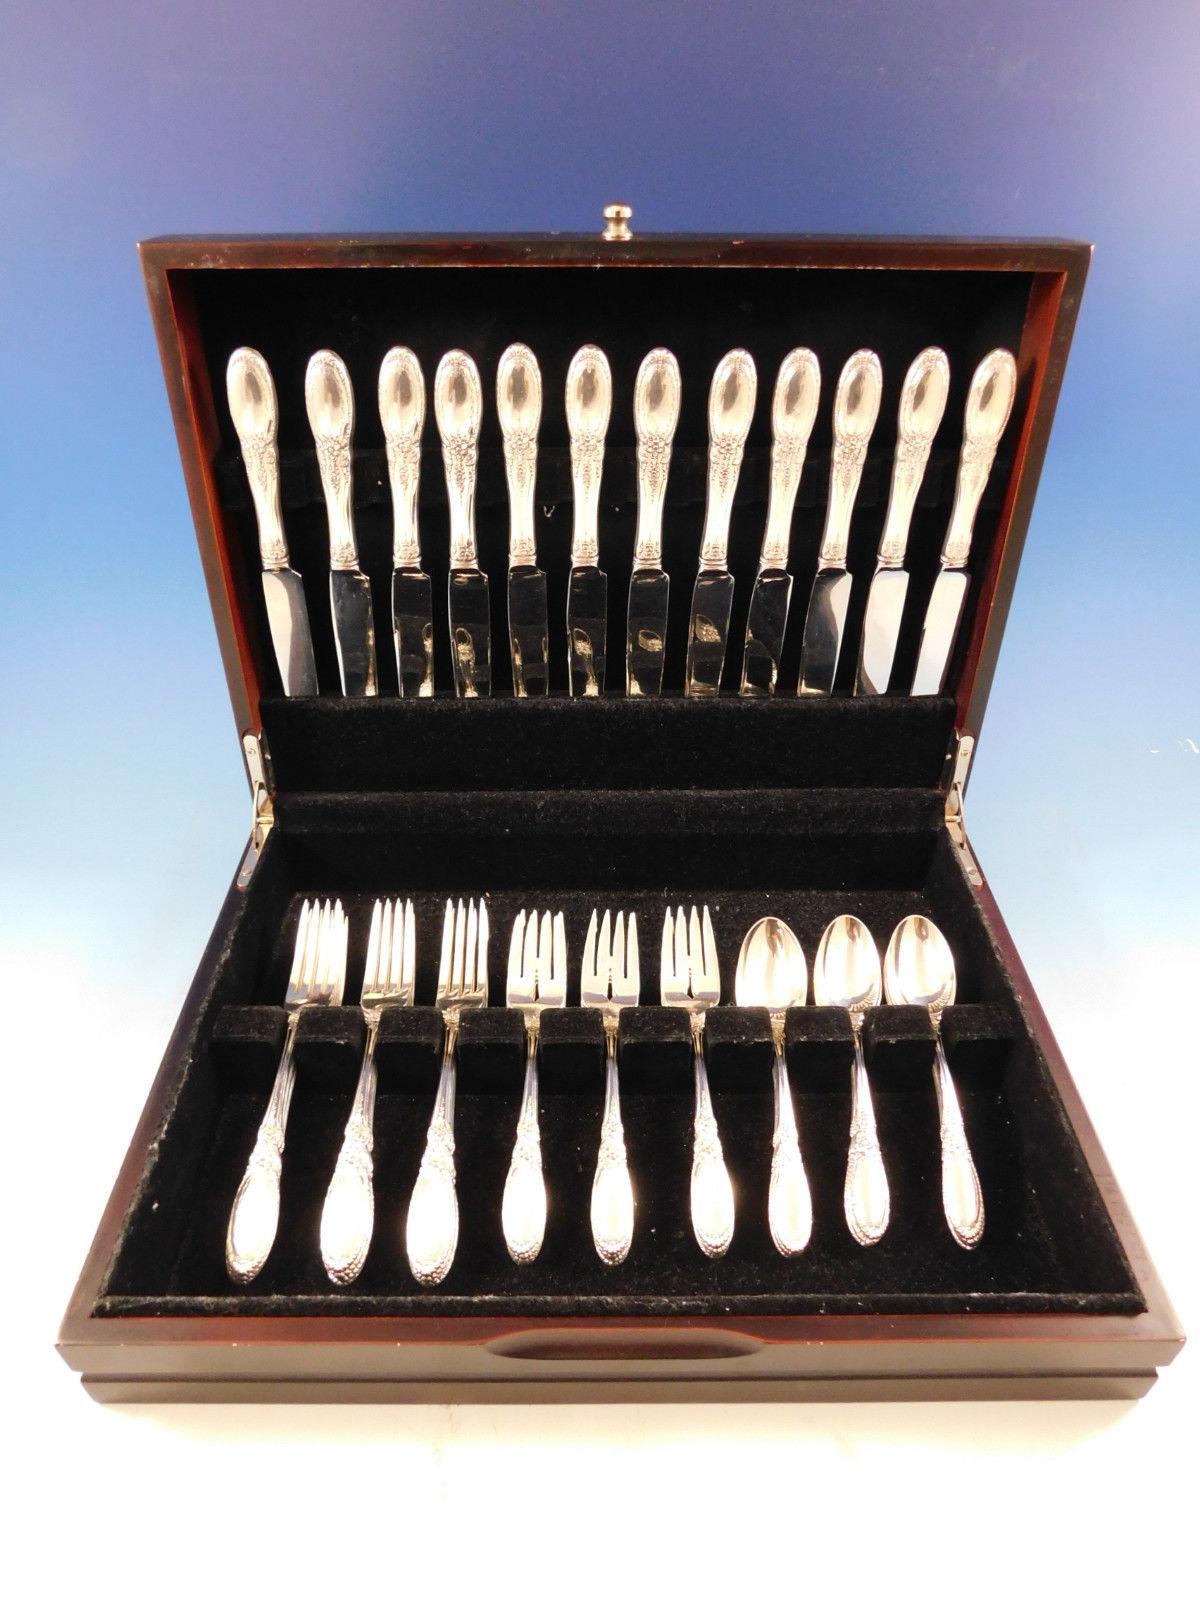 Heirloom quality old mirror by Towle sterling silver flatware set - 48 pieces. This set includes:

12 knives, 8 3/4